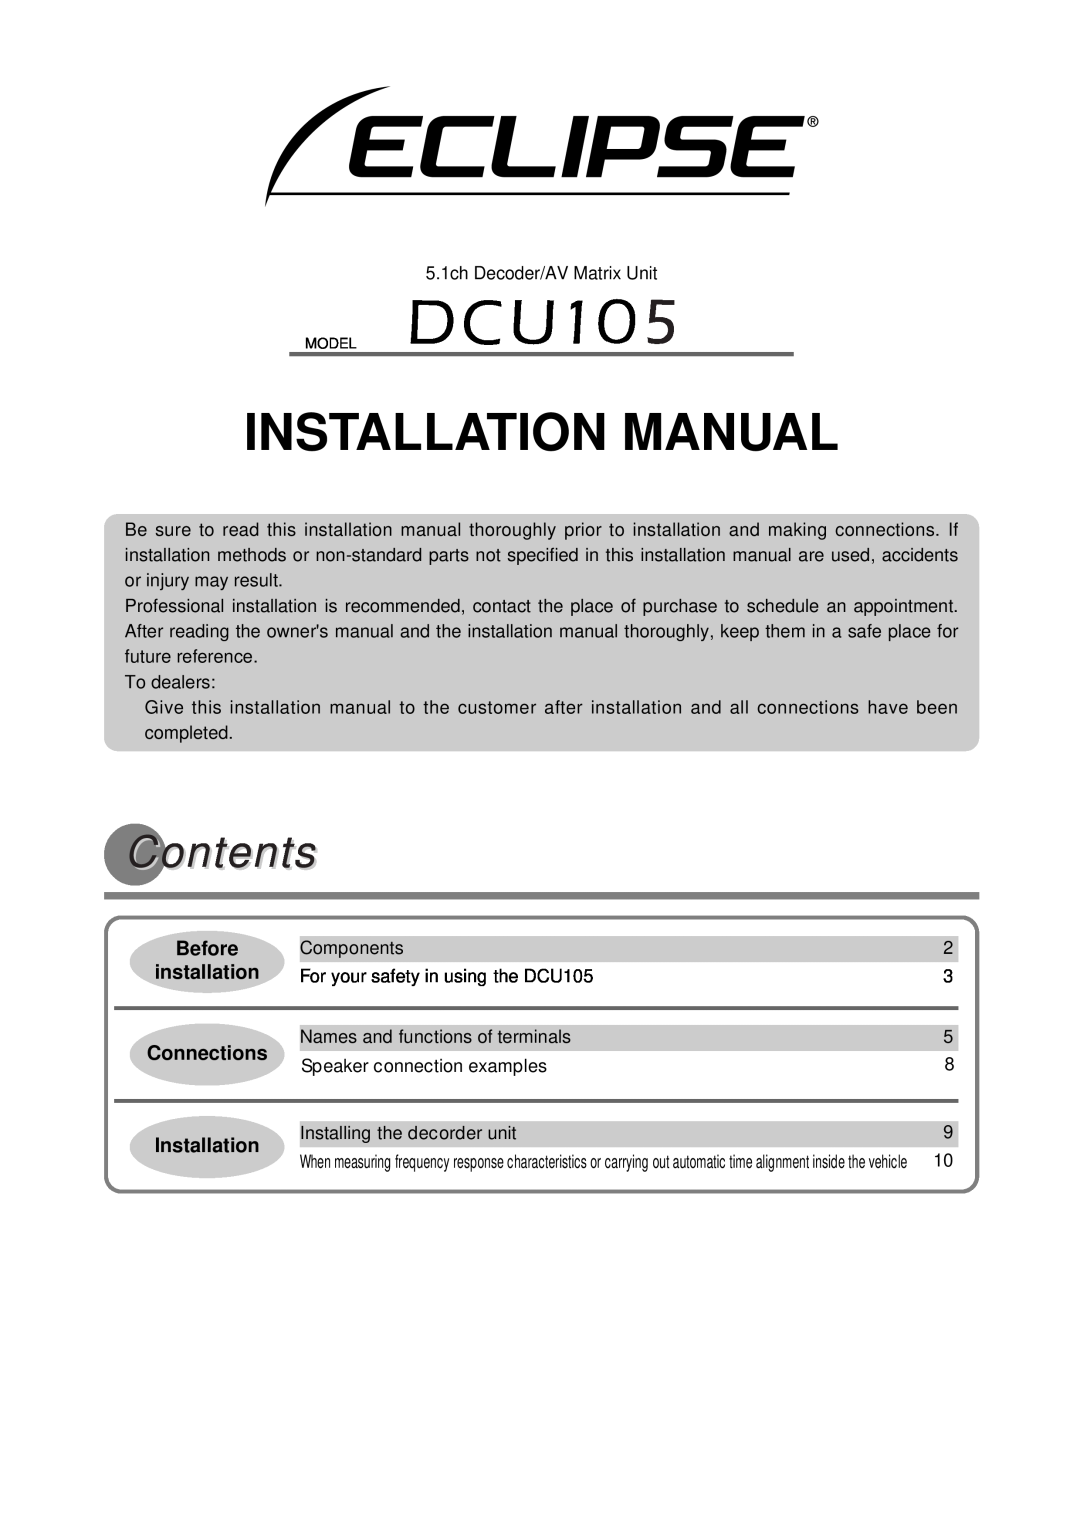 Fujitsu DCU105 3 installation manual Installation Manual, Contents, Before, Connections 